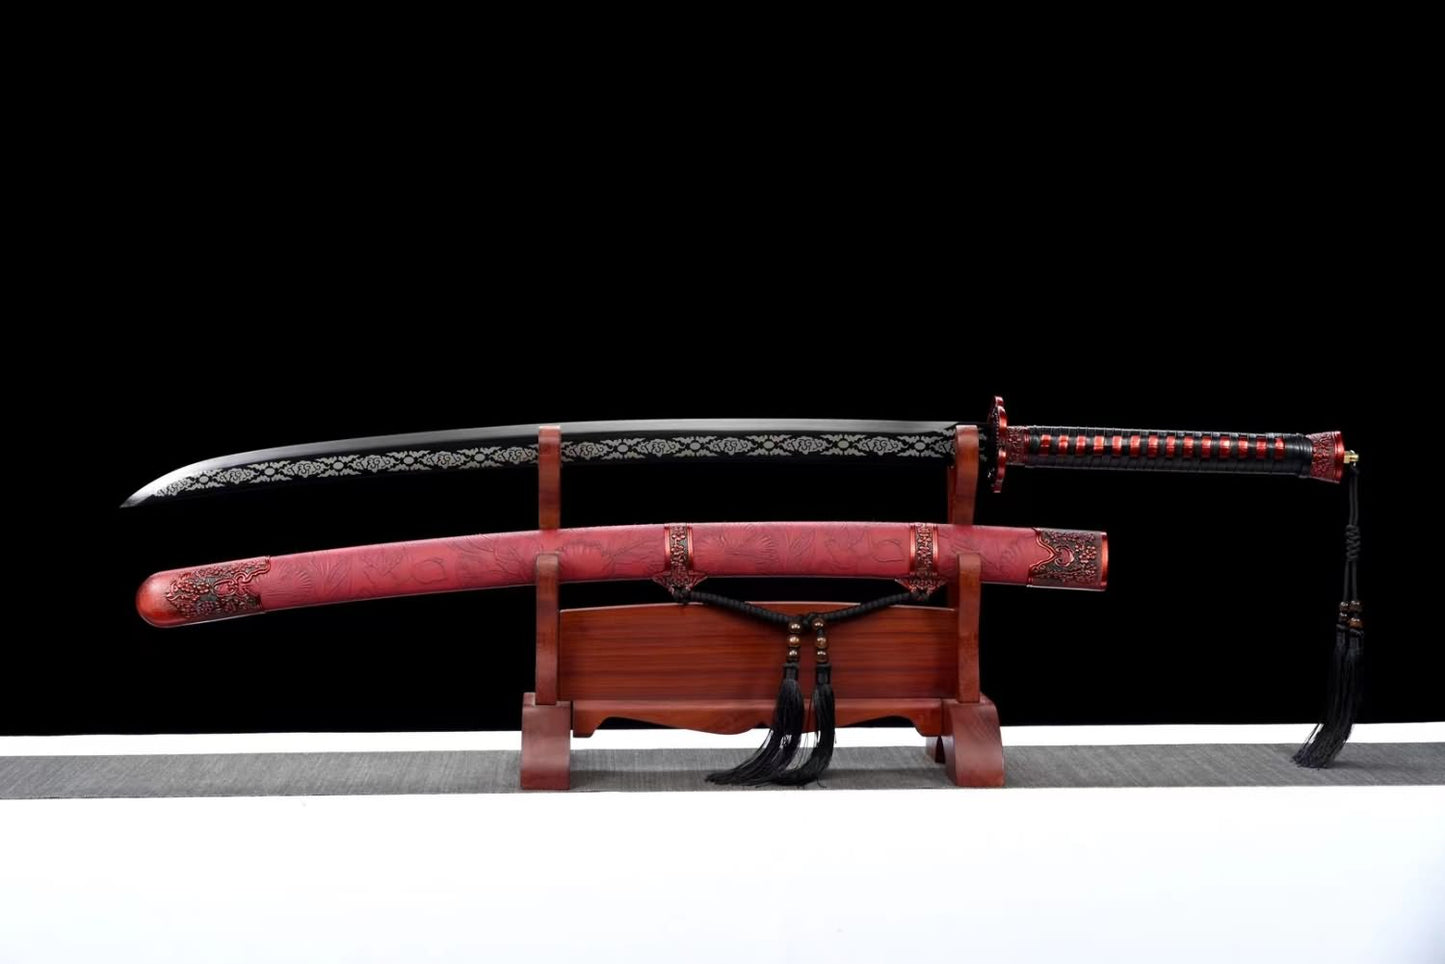 Qing dao Sword Real Forged High Carbon Steel Blade,Alloy Fittings,Red Scabbard